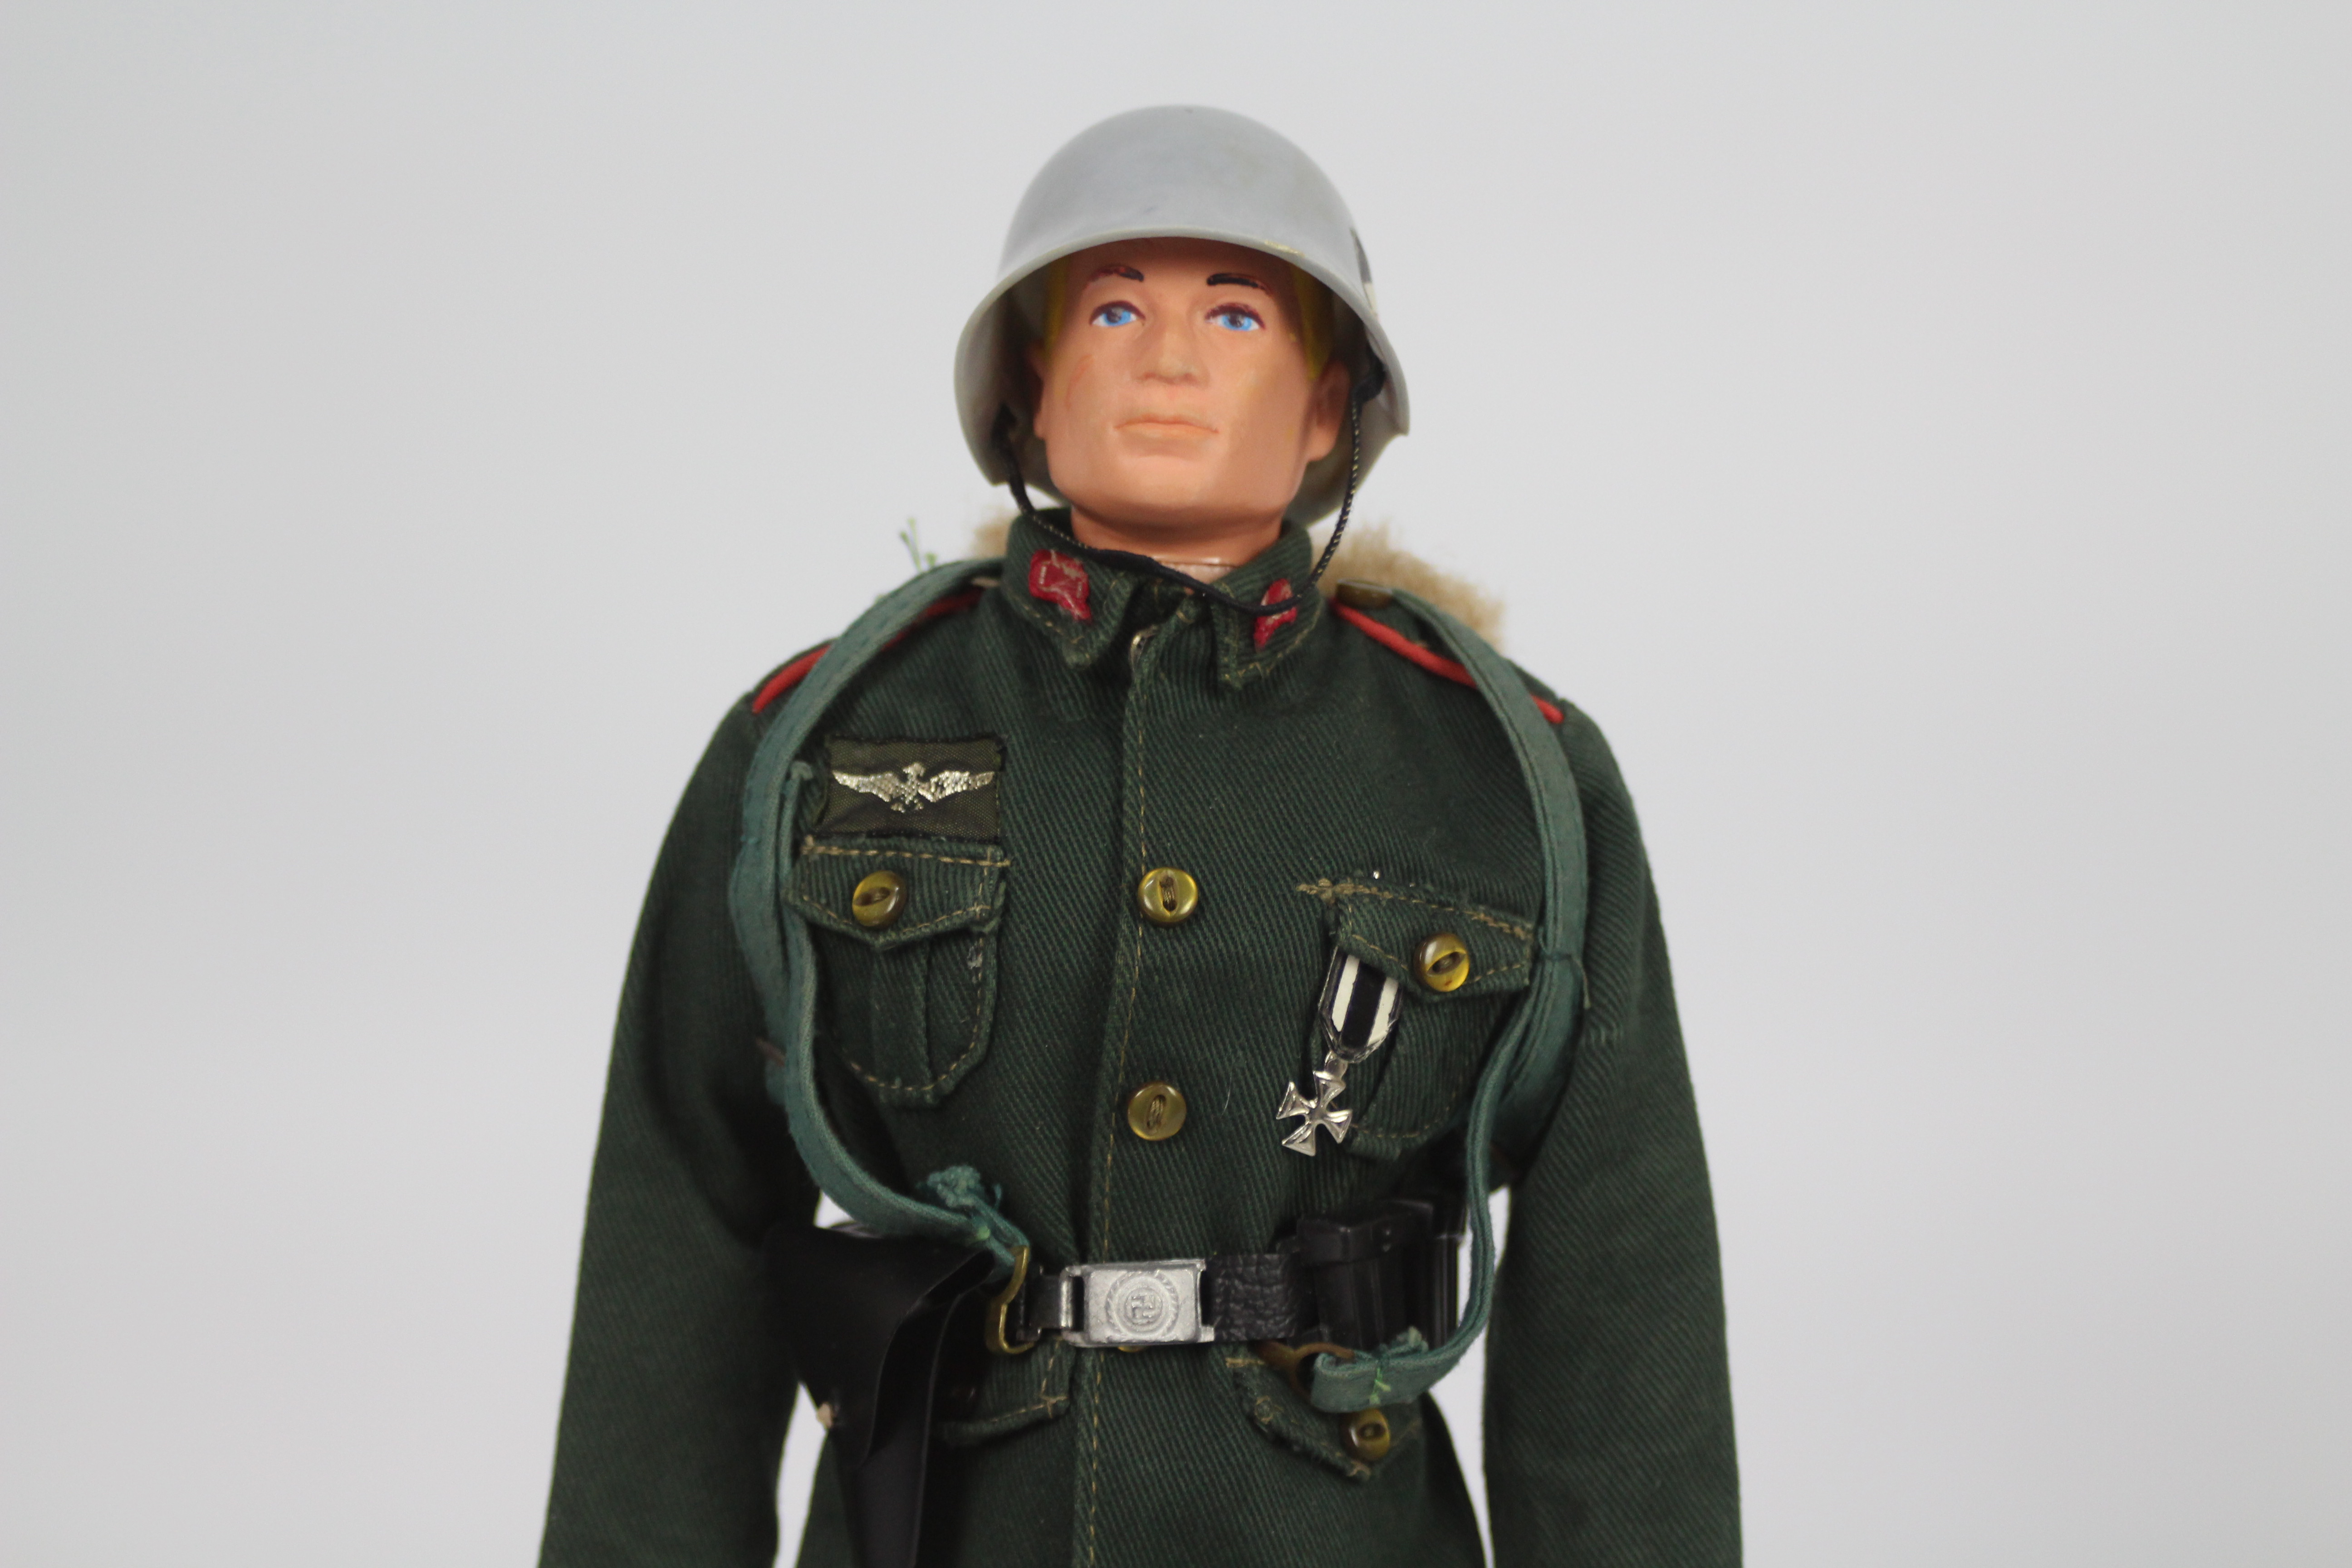 Palitoy, Action Man - A Palitoy Action Man in German Stormtrooper outfit. - Image 2 of 9